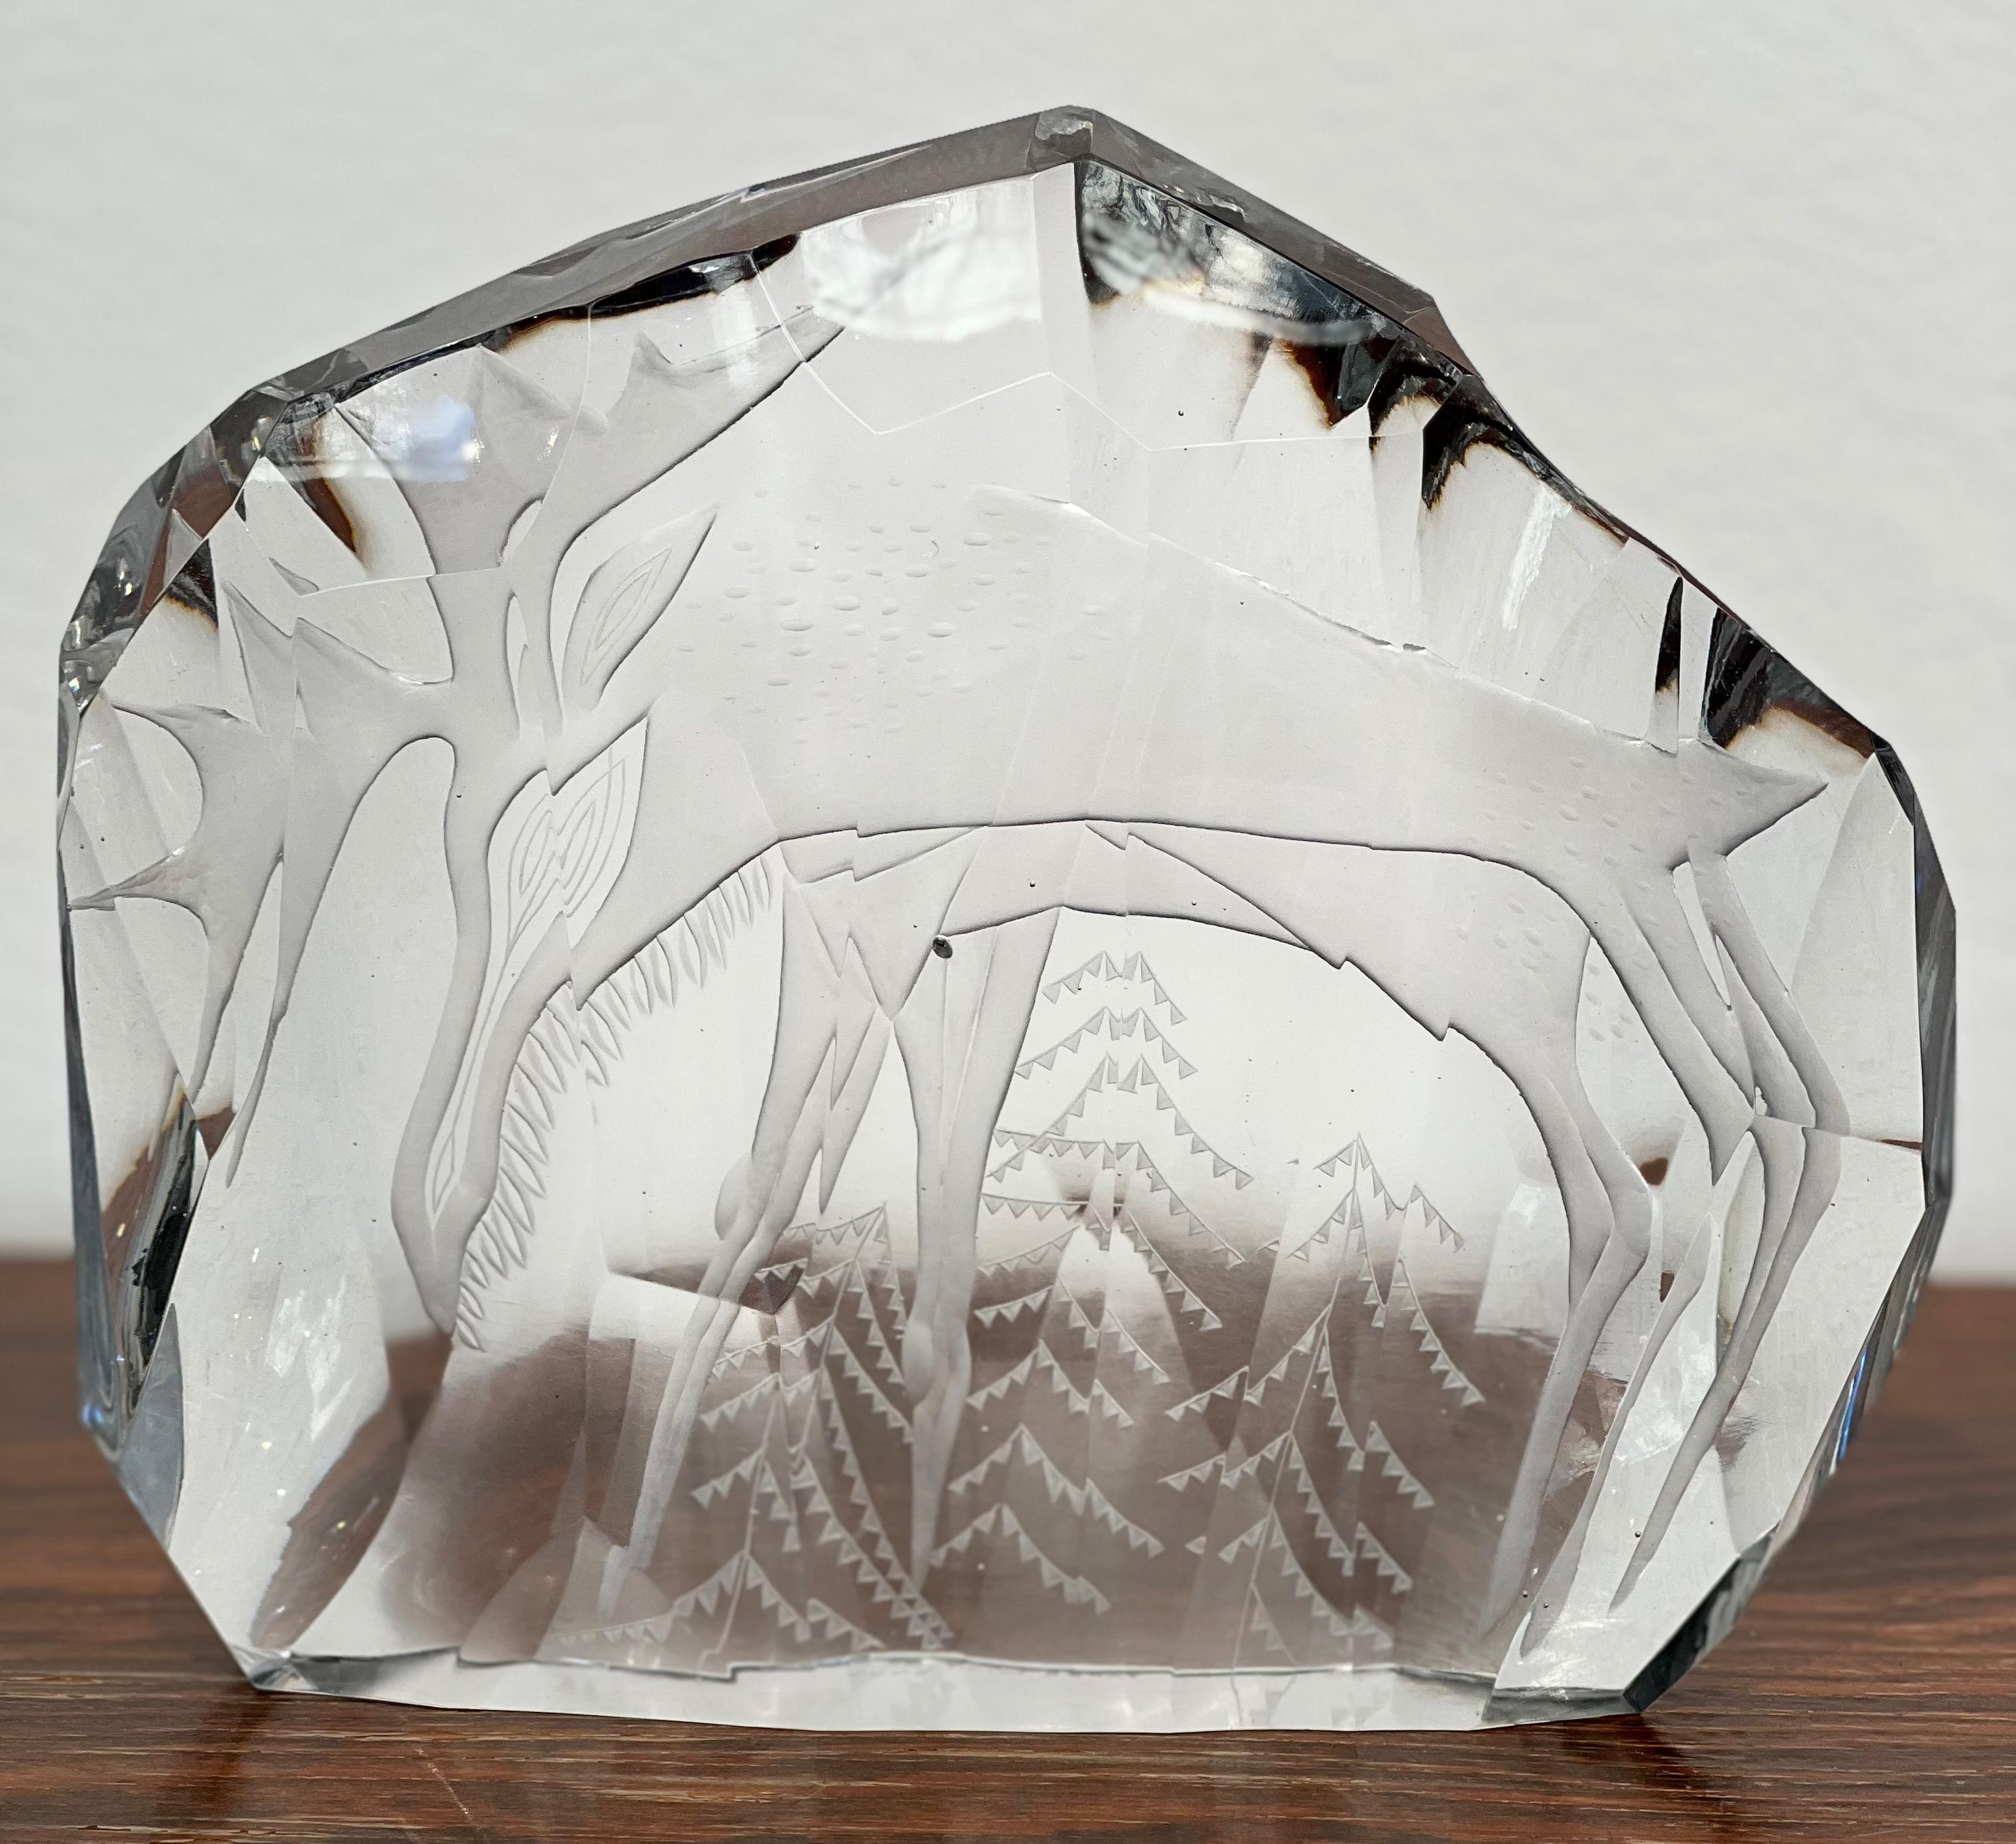 Tapio Wirkkala Iittala Art object - Sculptur 1952

Cast crystal glass - cut - engraved by Theodor Käppi 

Signed Tapio Wirkkala - Iittala 3400

According to Finnish Glass Museum only 3 of these items were made and this 
one is one of the known